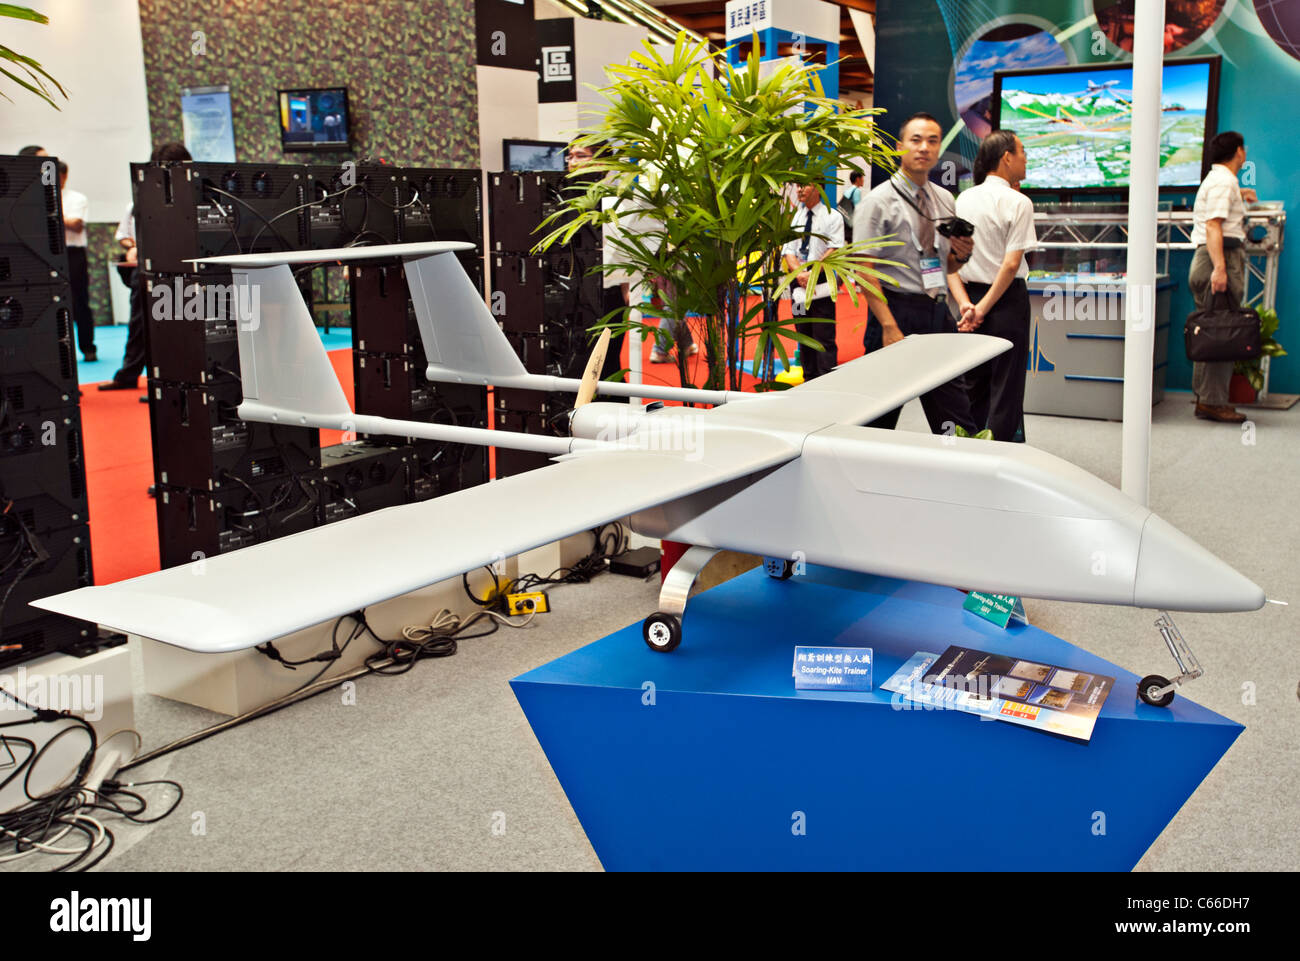 Soaring Kite Trainer UAV, Unmanned Aerial Vehicle System, Taipei Aerospace Defense Technology Exhibition, 2011, Taiwan Stock Photo